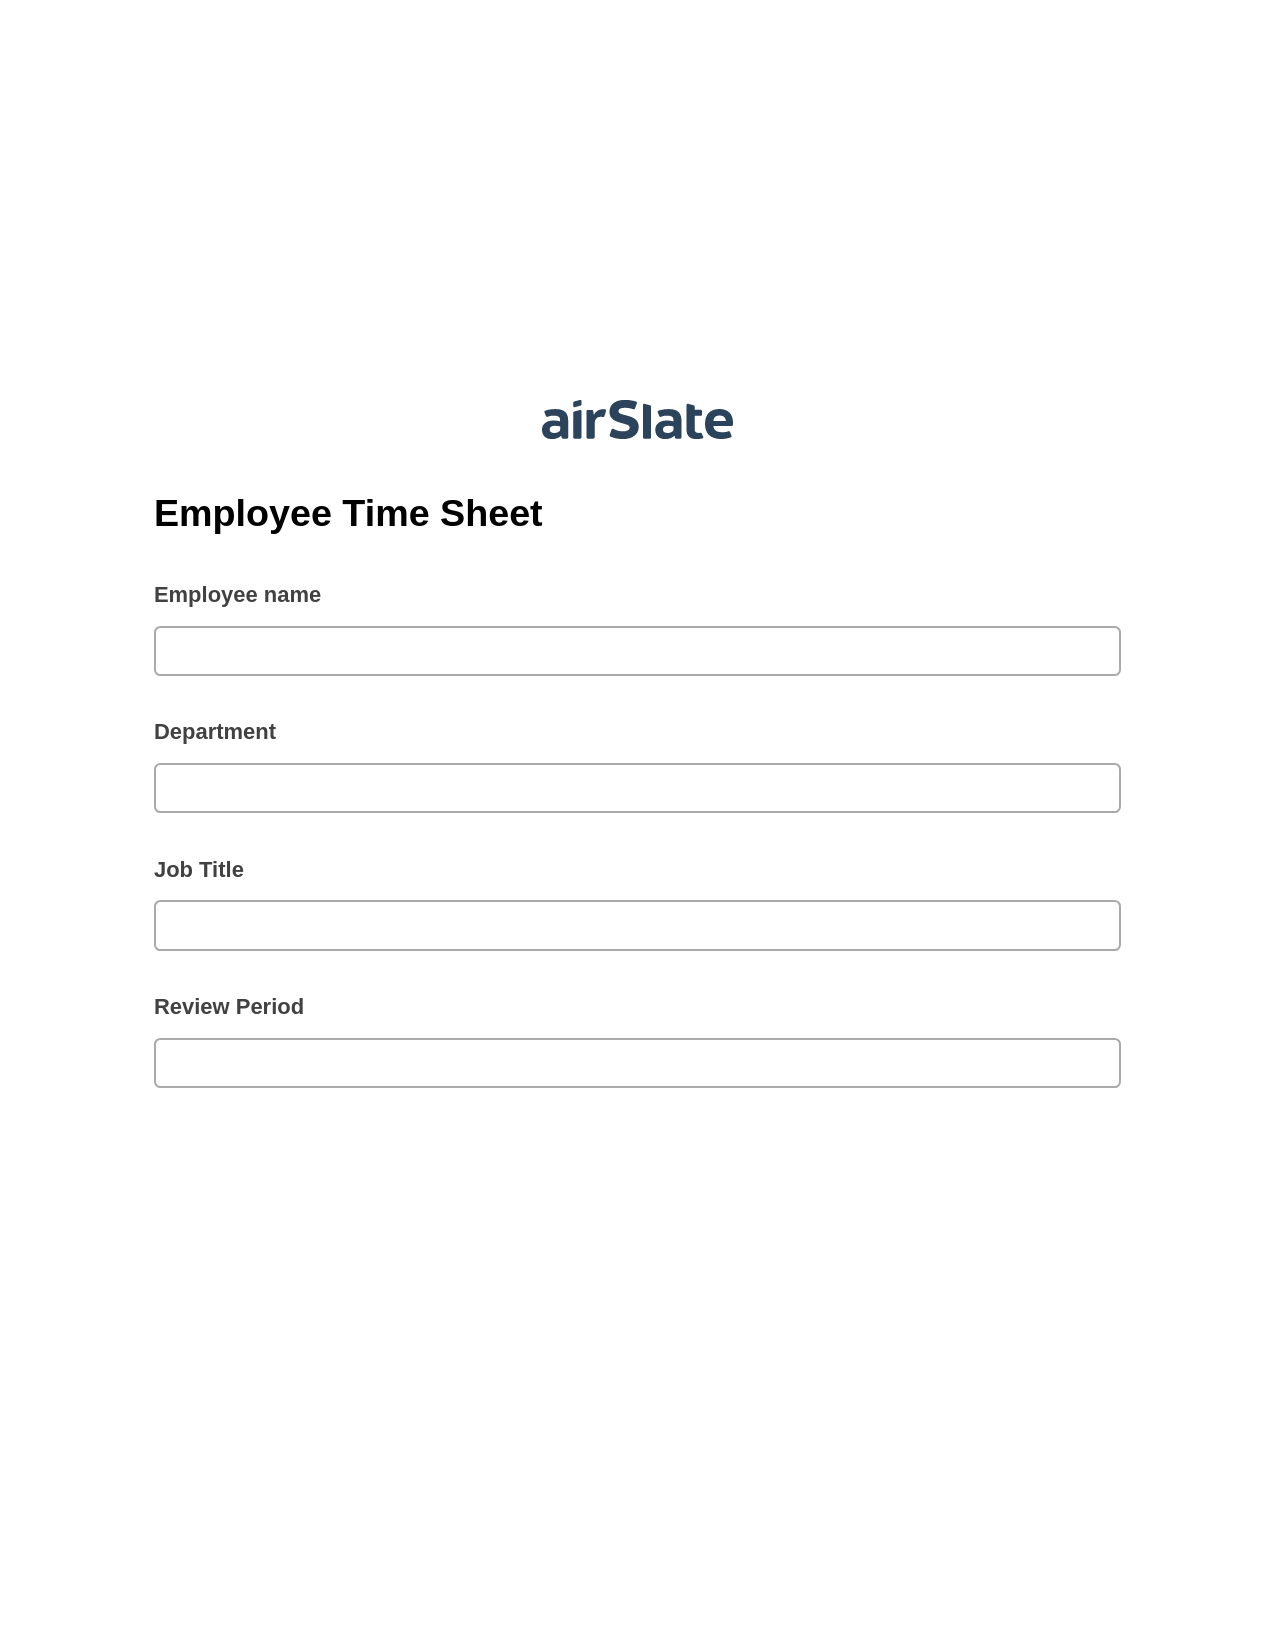 Employee Time Sheet Pre-fill from Salesforce Records Bot, Update Audit Trail Bot, Export to Smartsheet